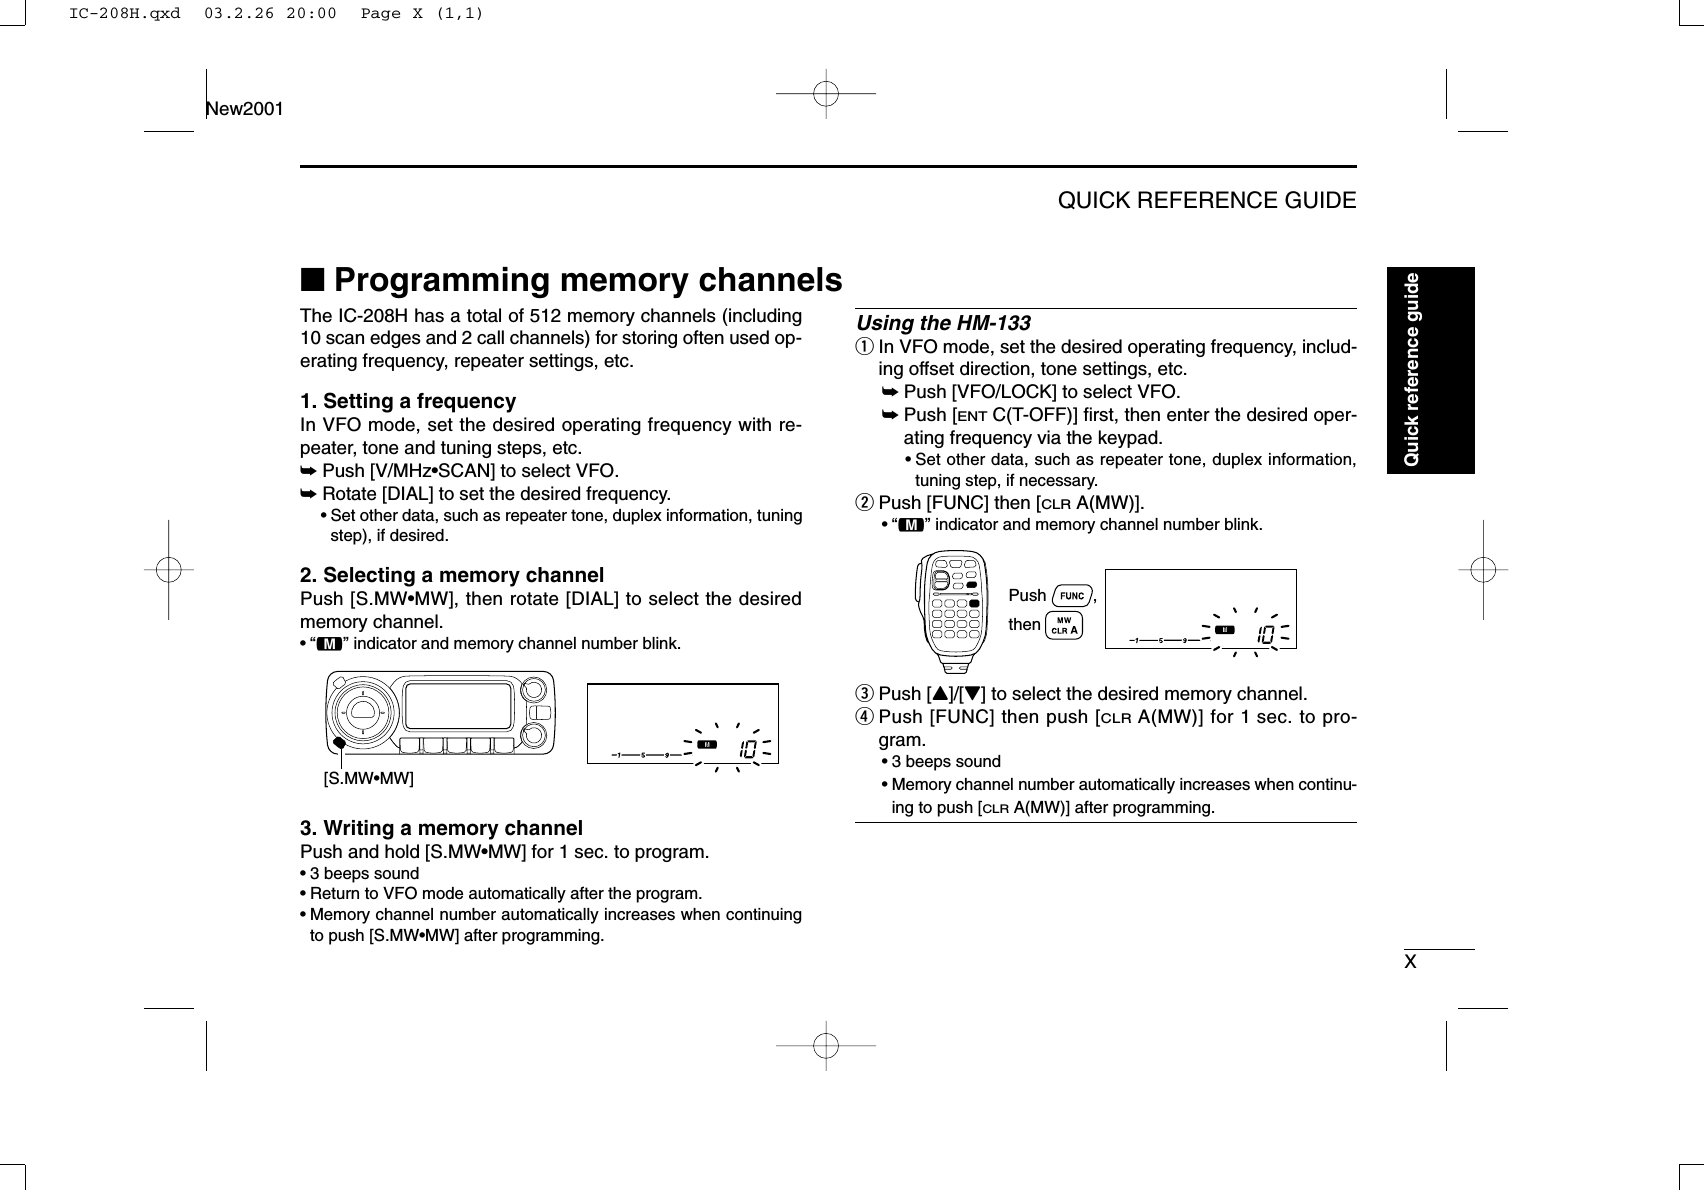 XQUICK REFERENCE GUIDENew2001Quick reference guide■Programming memory channelsThe IC-208H has a total of 512 memory channels (including10 scan edges and 2 call channels) for storing often used op-erating frequency, repeater settings, etc. 1. Setting a frequencyIn VFO mode, set the desired operating frequency with re-peater, tone and tuning steps, etc. ➥Push [V/MHz•SCAN] to select VFO.➥Rotate [DIAL] to set the desired frequency.•Set other data, such as repeater tone, duplex information, tuningstep), if desired.2. Selecting a memory channel Push [S.MW•MW], then rotate [DIAL] to select the desiredmemory channel.•“!” indicator and memory channel number blink.3. Writing a memory channelPush and hold [S.MW•MW] for 1 sec. to program.•3 beeps sound•Return to VFO mode automatically after the program.•Memory channel number automatically increases when continuingto push [S.MW•MW] after programming.Using the HM-133qIn VFO mode, set the desired operating frequency, includ-ing offset direction, tone settings, etc.➥Push [VFO/LOCK] to select VFO.➥Push [ENTC(T-OFF)] ﬁrst, then enter the desired oper-ating frequency via the keypad.•Set other data, such as repeater tone, duplex information,tuning step, if necessary.wPush [FUNC] then [CLRA(MW)].•“!” indicator and memory channel number blink.ePush [Y]/[Z] to select the desired memory channel.rPush [FUNC] then push [CLRA(MW)] for 1 sec. to pro-gram.•3 beeps sound•Memory channel number automatically increases when continu-ing to push [CLRA(MW)] after programming.Push          , then [S.MW•MW]IC-208H.qxd  03.2.26 20:00  Page X (1,1)